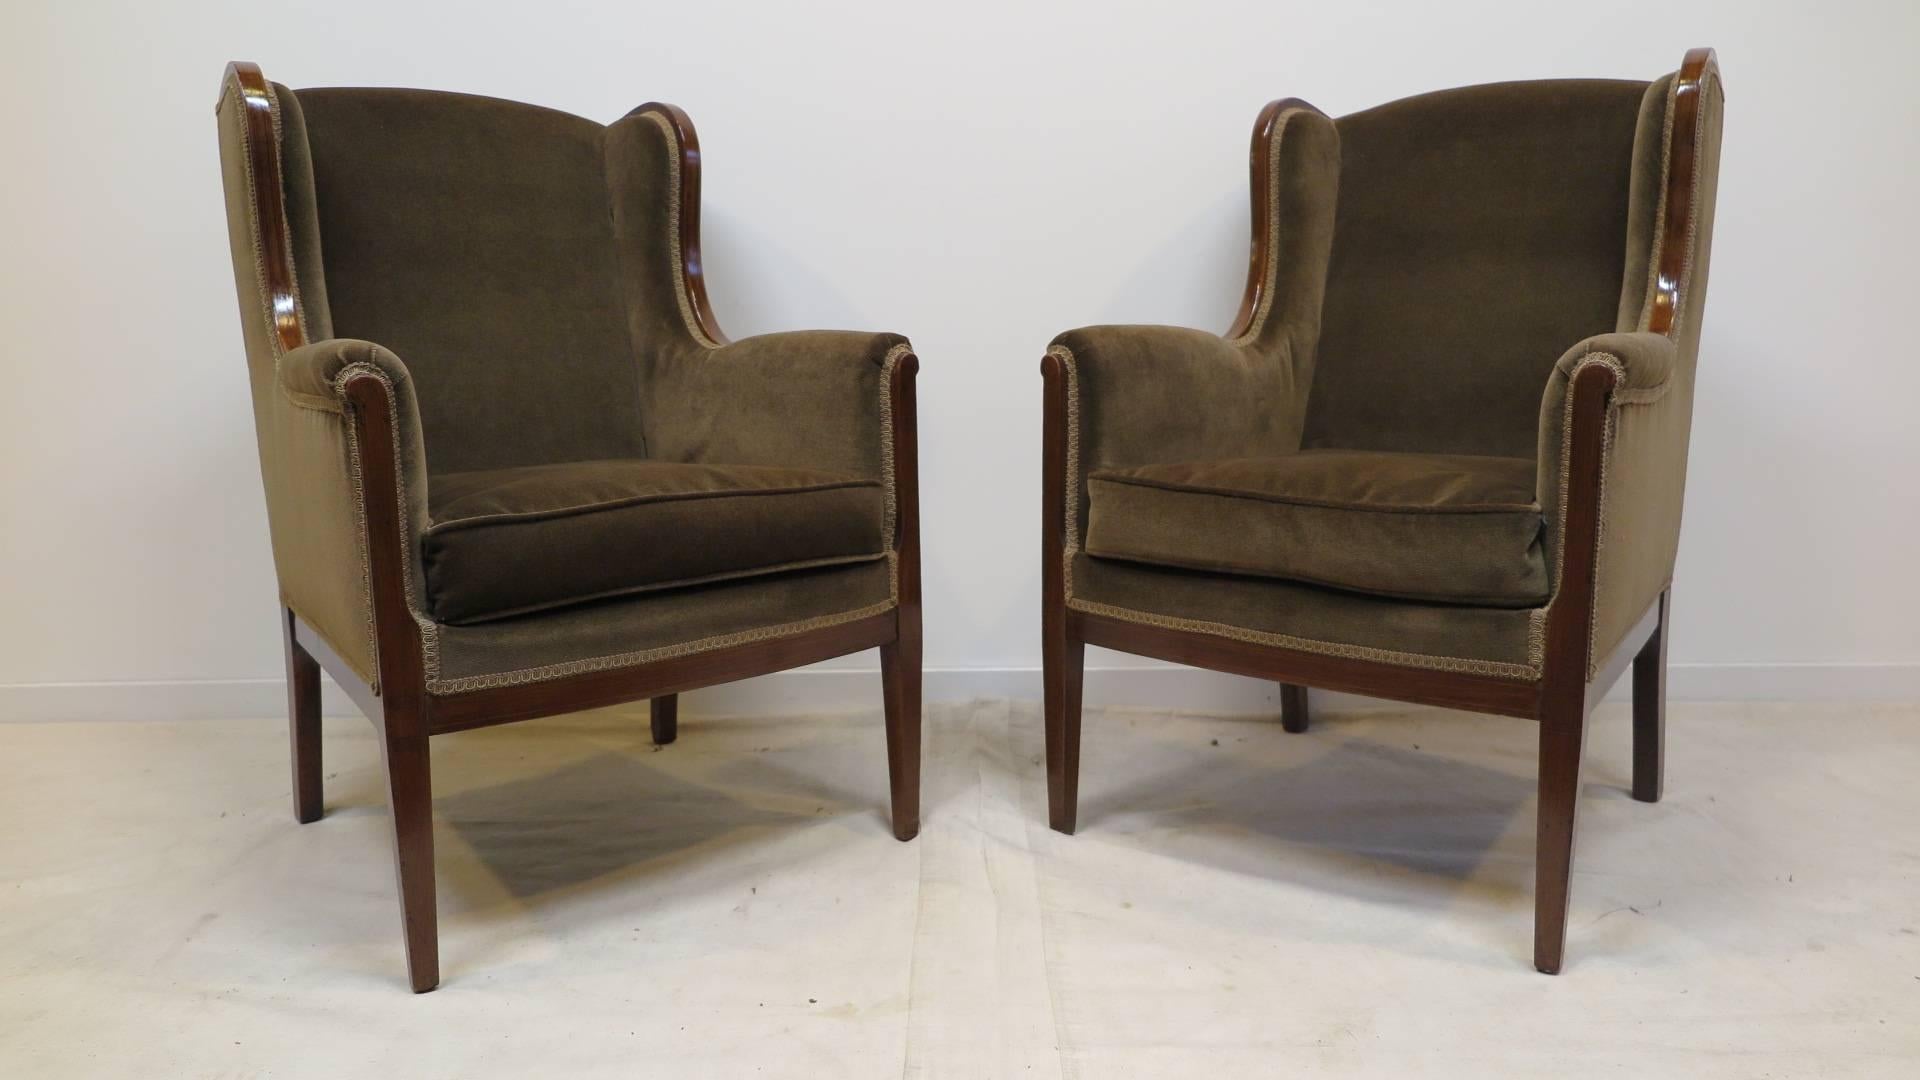 A pair of French wing club chairs. Having fine inlay details on mahogany frames with mohair upholstery, France 1930-1940.
In very good condition. Small dings to the wood frames see pictures.
upholstery is recent, clean and in very good condition.